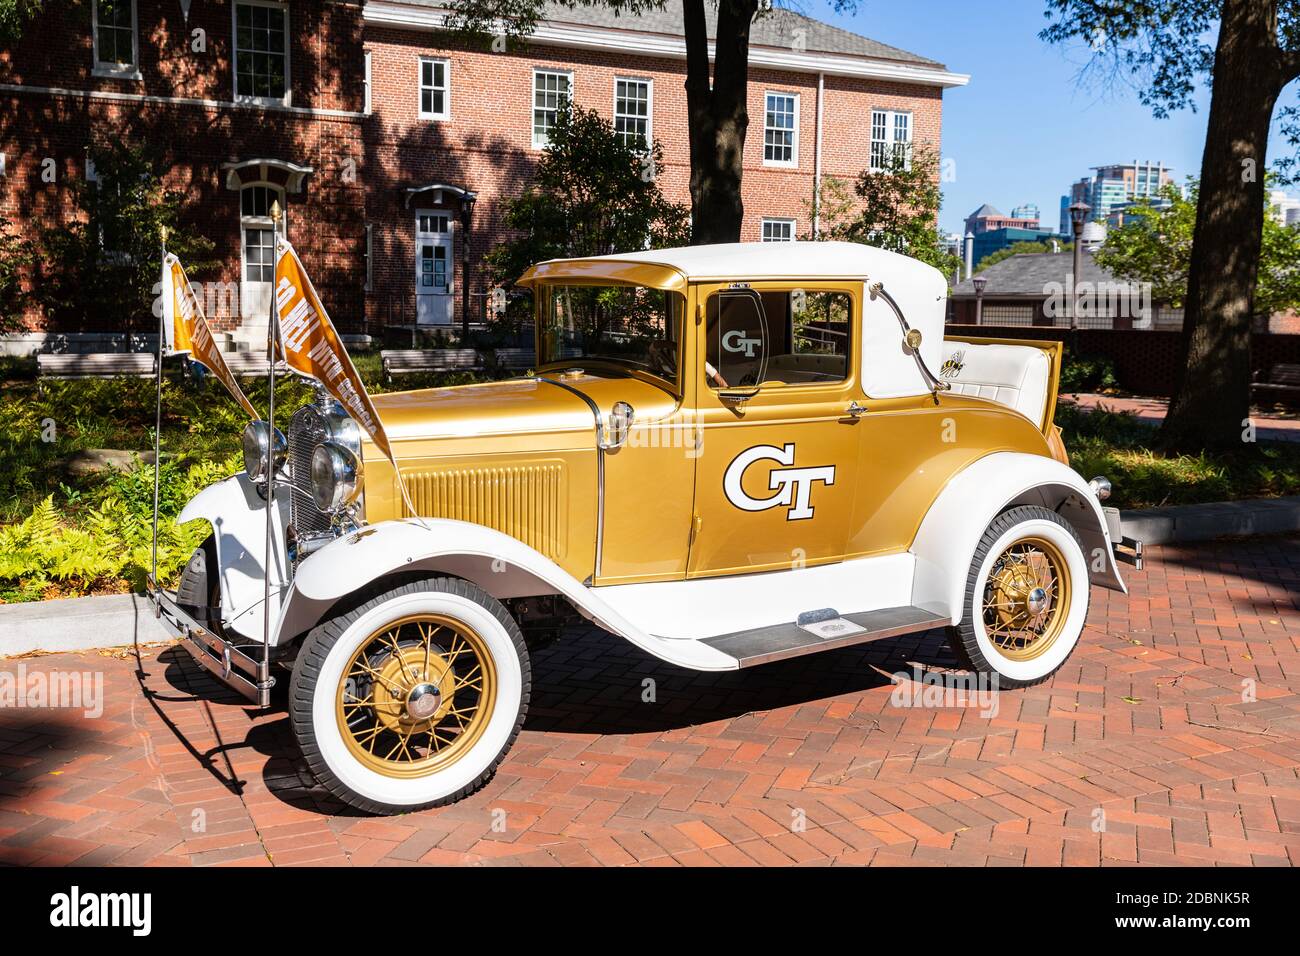 Atlanta, GA / USA - October 30 2020: The Ramblin' Reck from Georgia Tech is a 1930 Ford Model A Sport coupe and serves as the official mascot of the s Stock Photo